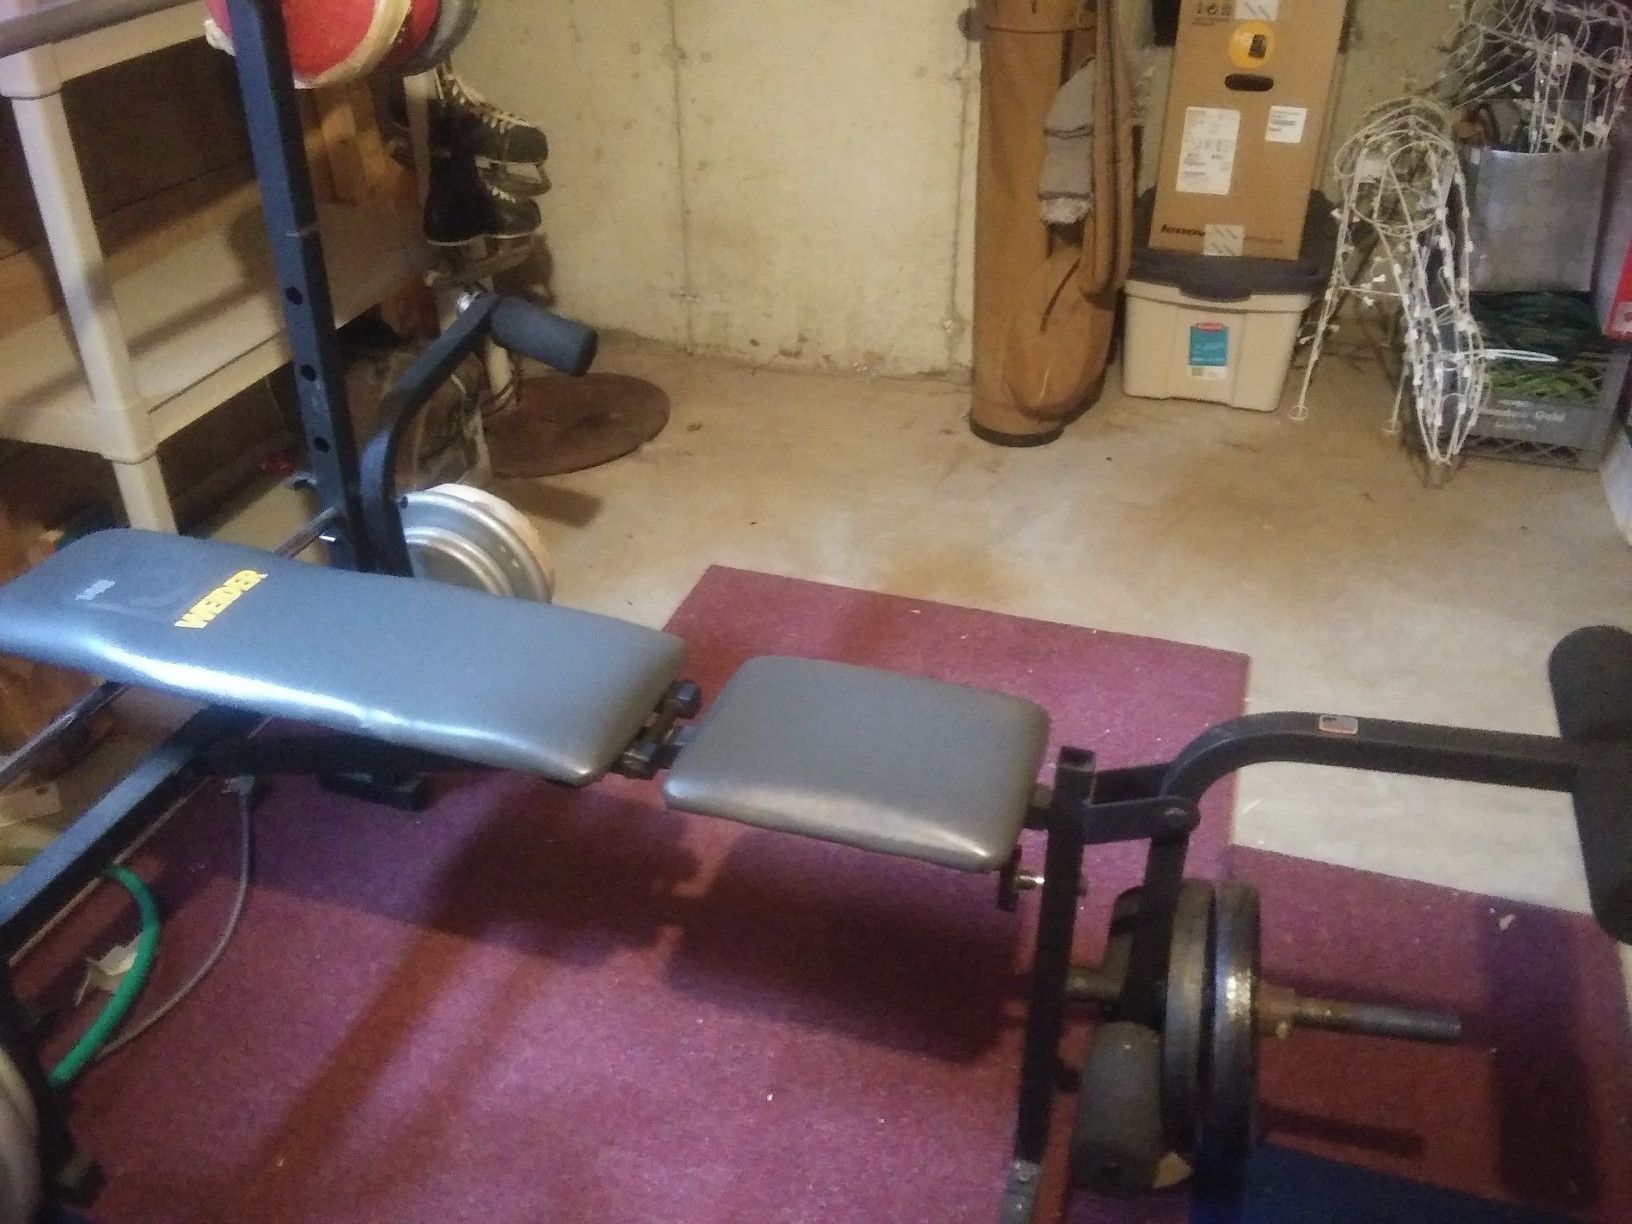 Joe Weider weight bench, bar bell, dumbells and 280 lbs of weights. 160 lbs of 280 lbs is steel